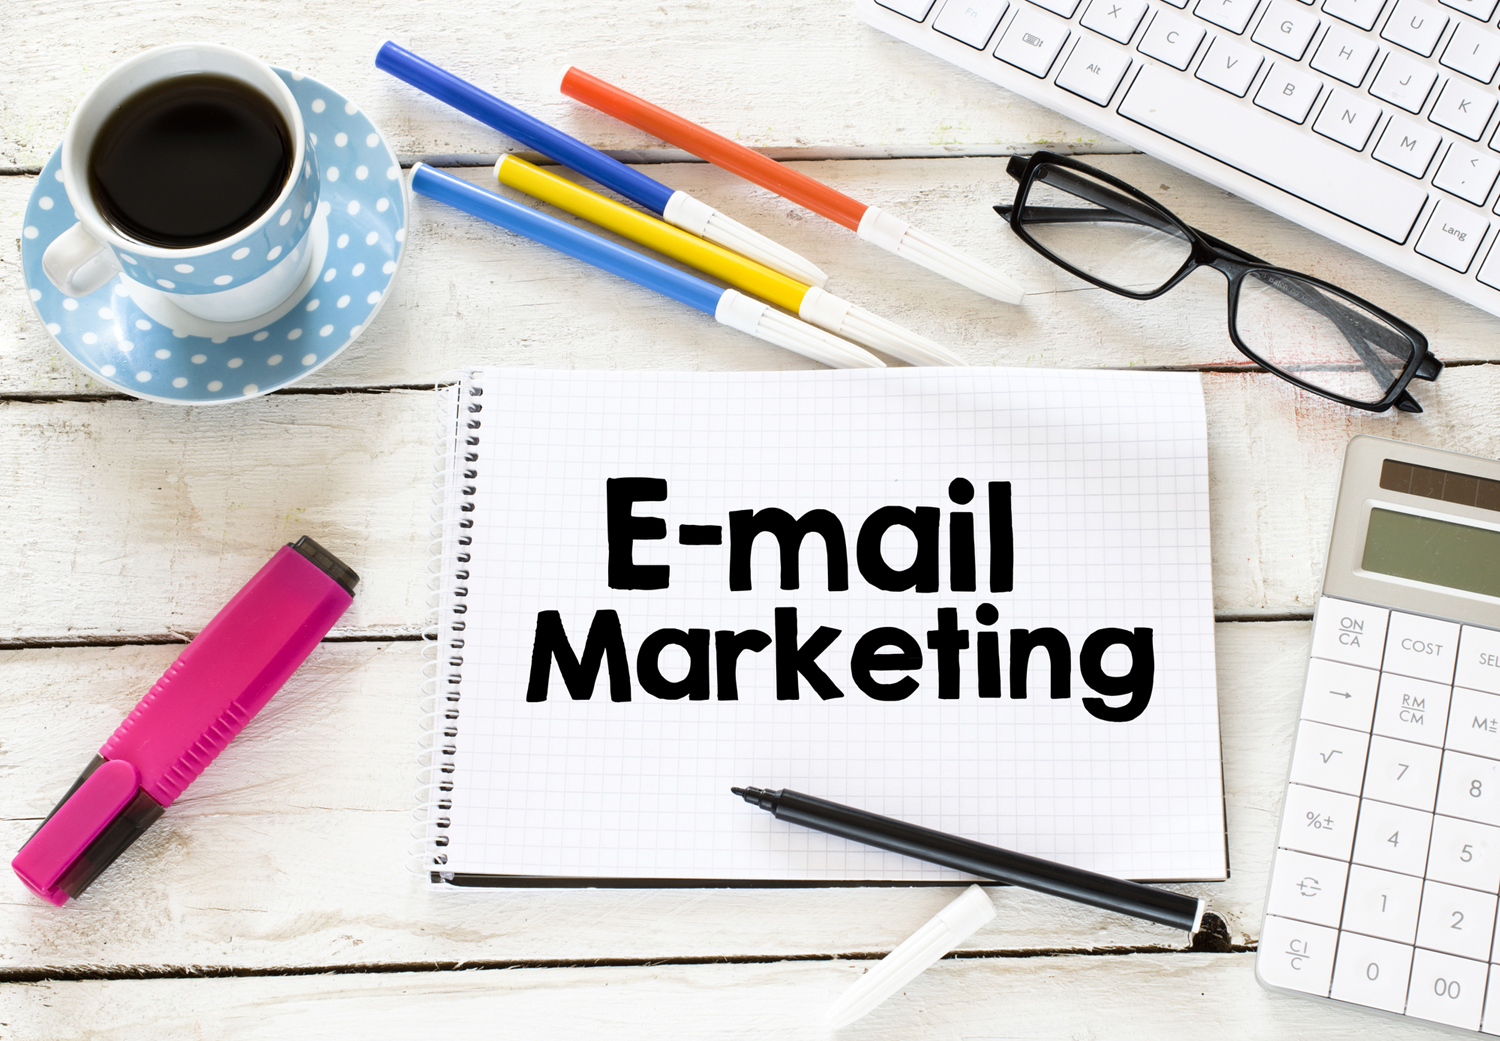 Rely on email marketing